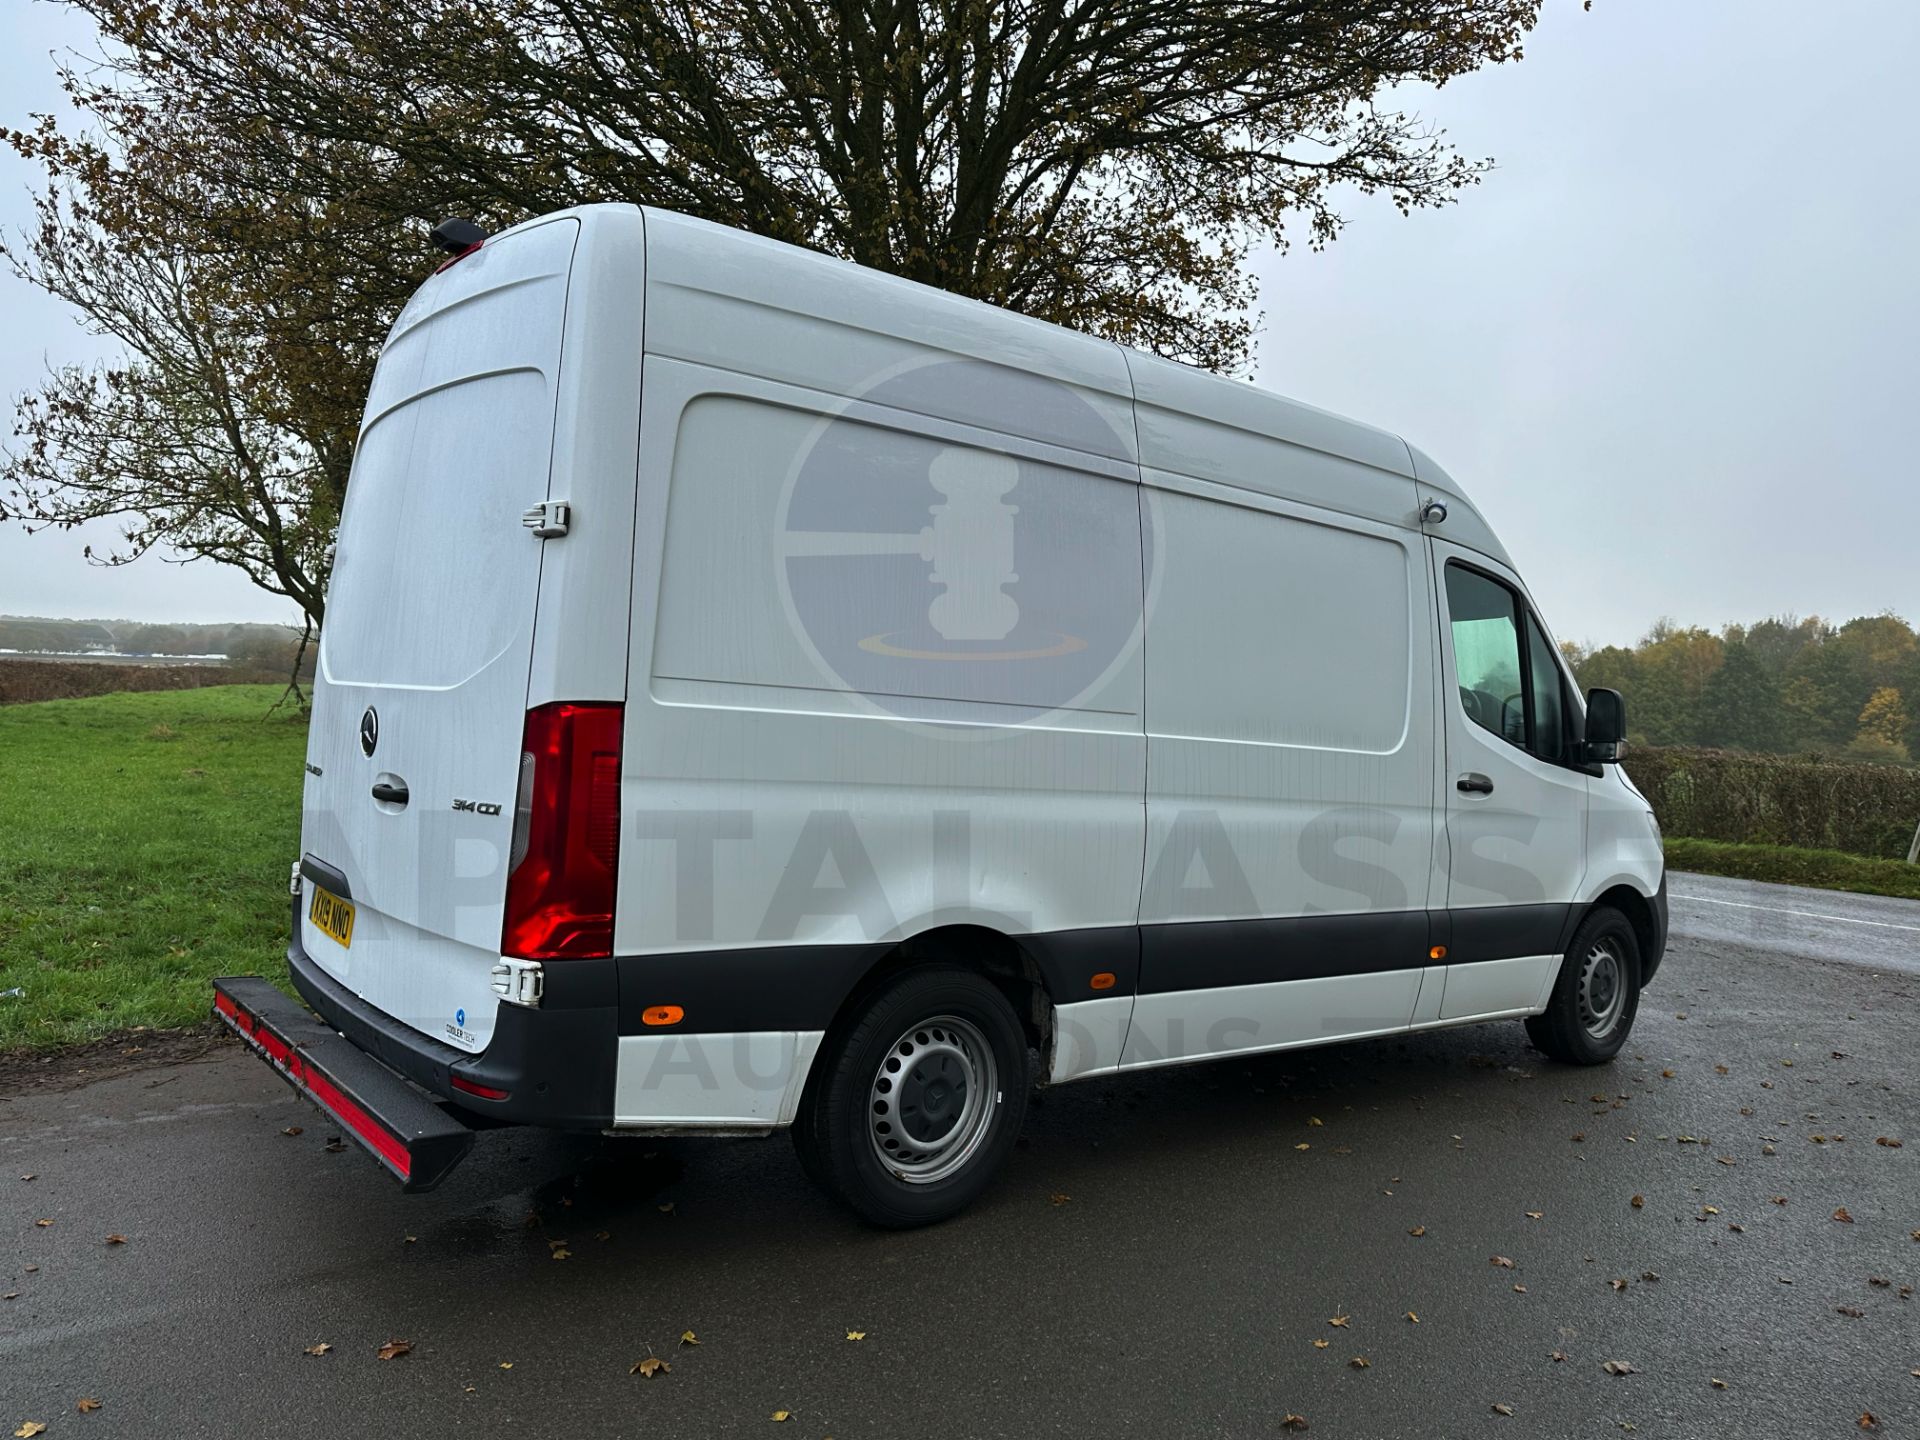 MERCEDES-BENZ SPRINTER 314 CDI *MWB - REFRIGERATED VAN* (2019 - FACELIFT MODEL) *OVERNIGHT STANDBY* - Image 13 of 45